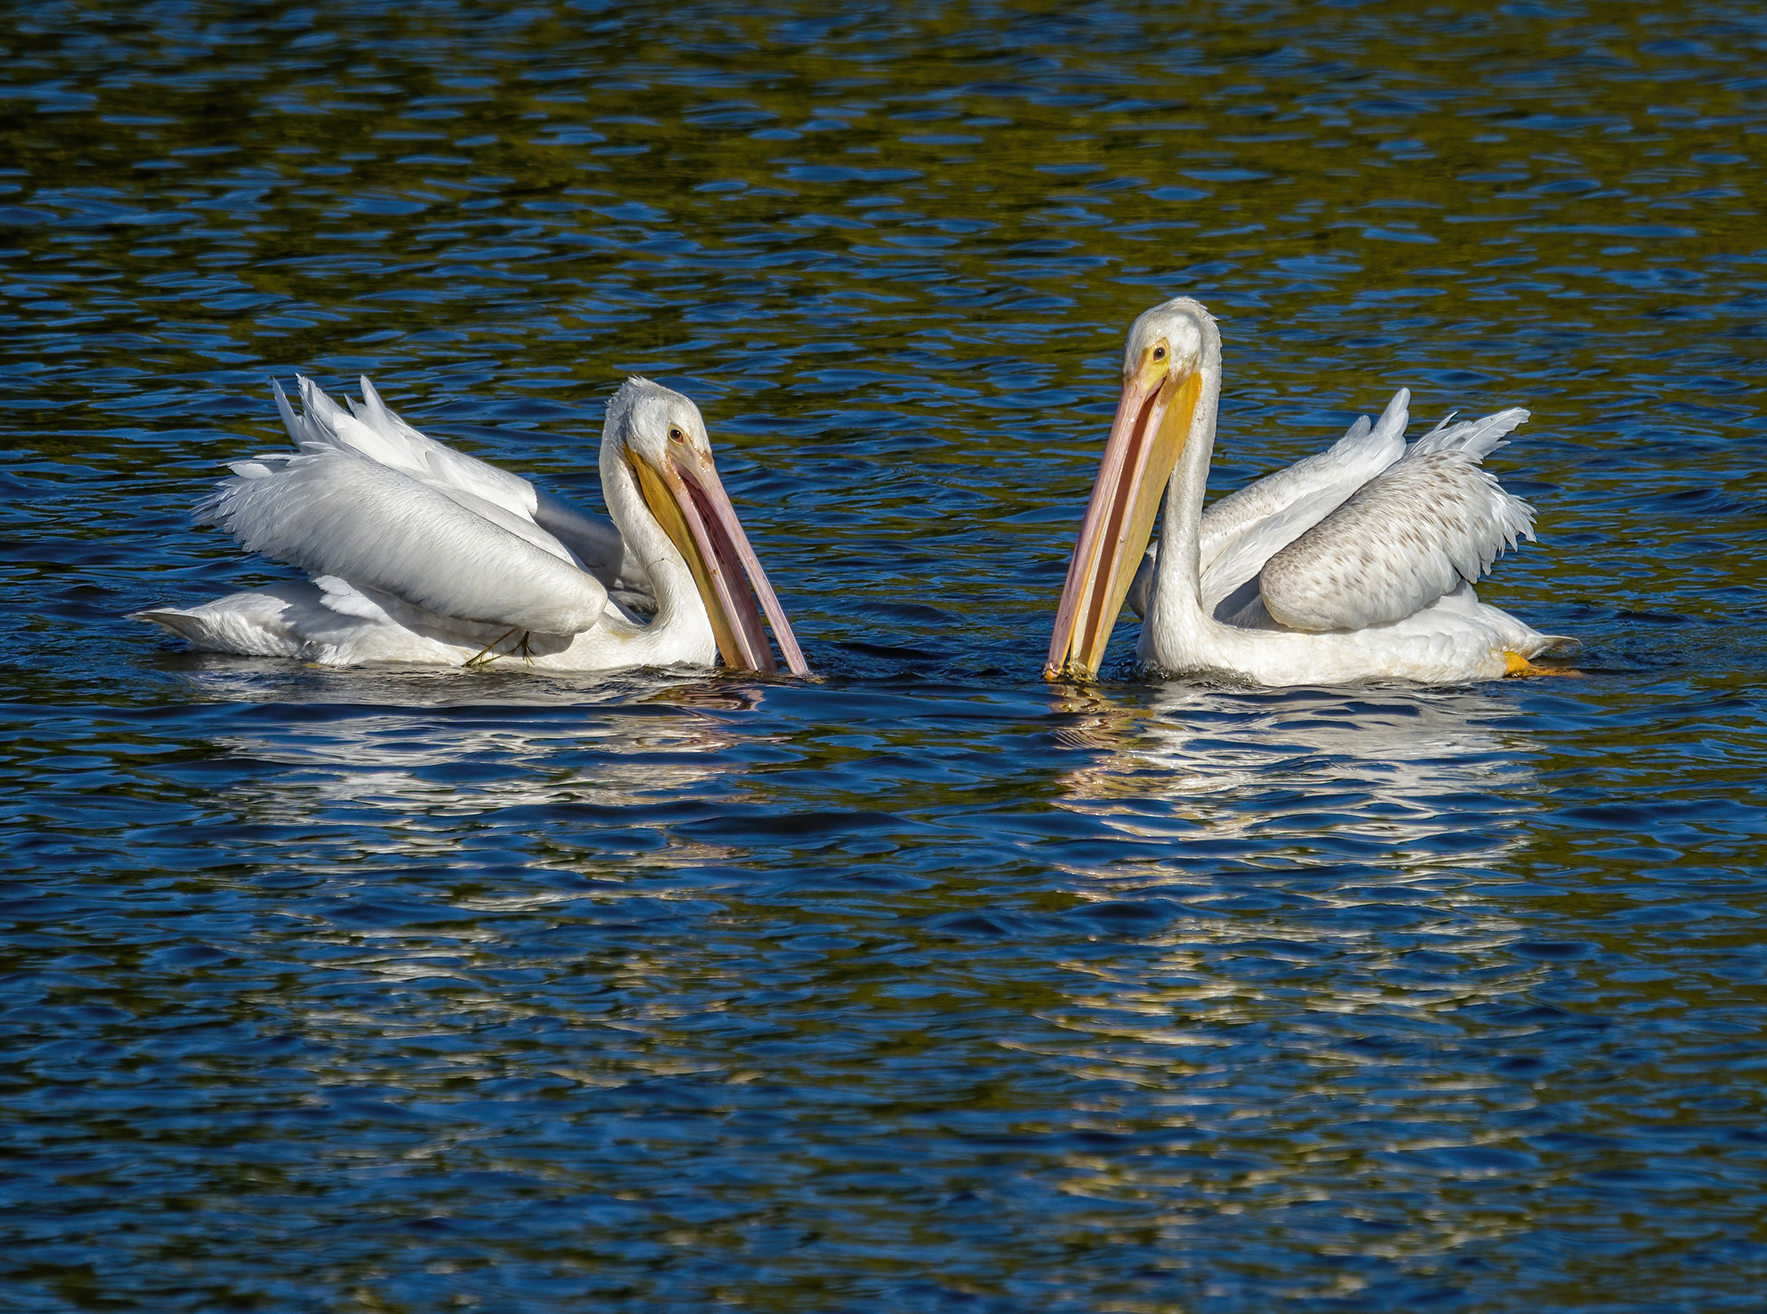 Photo by Theresa Rose Ditson  |  "Fishing Buddies:" Two pelicans hoping there are still plenty of fish in the sea.